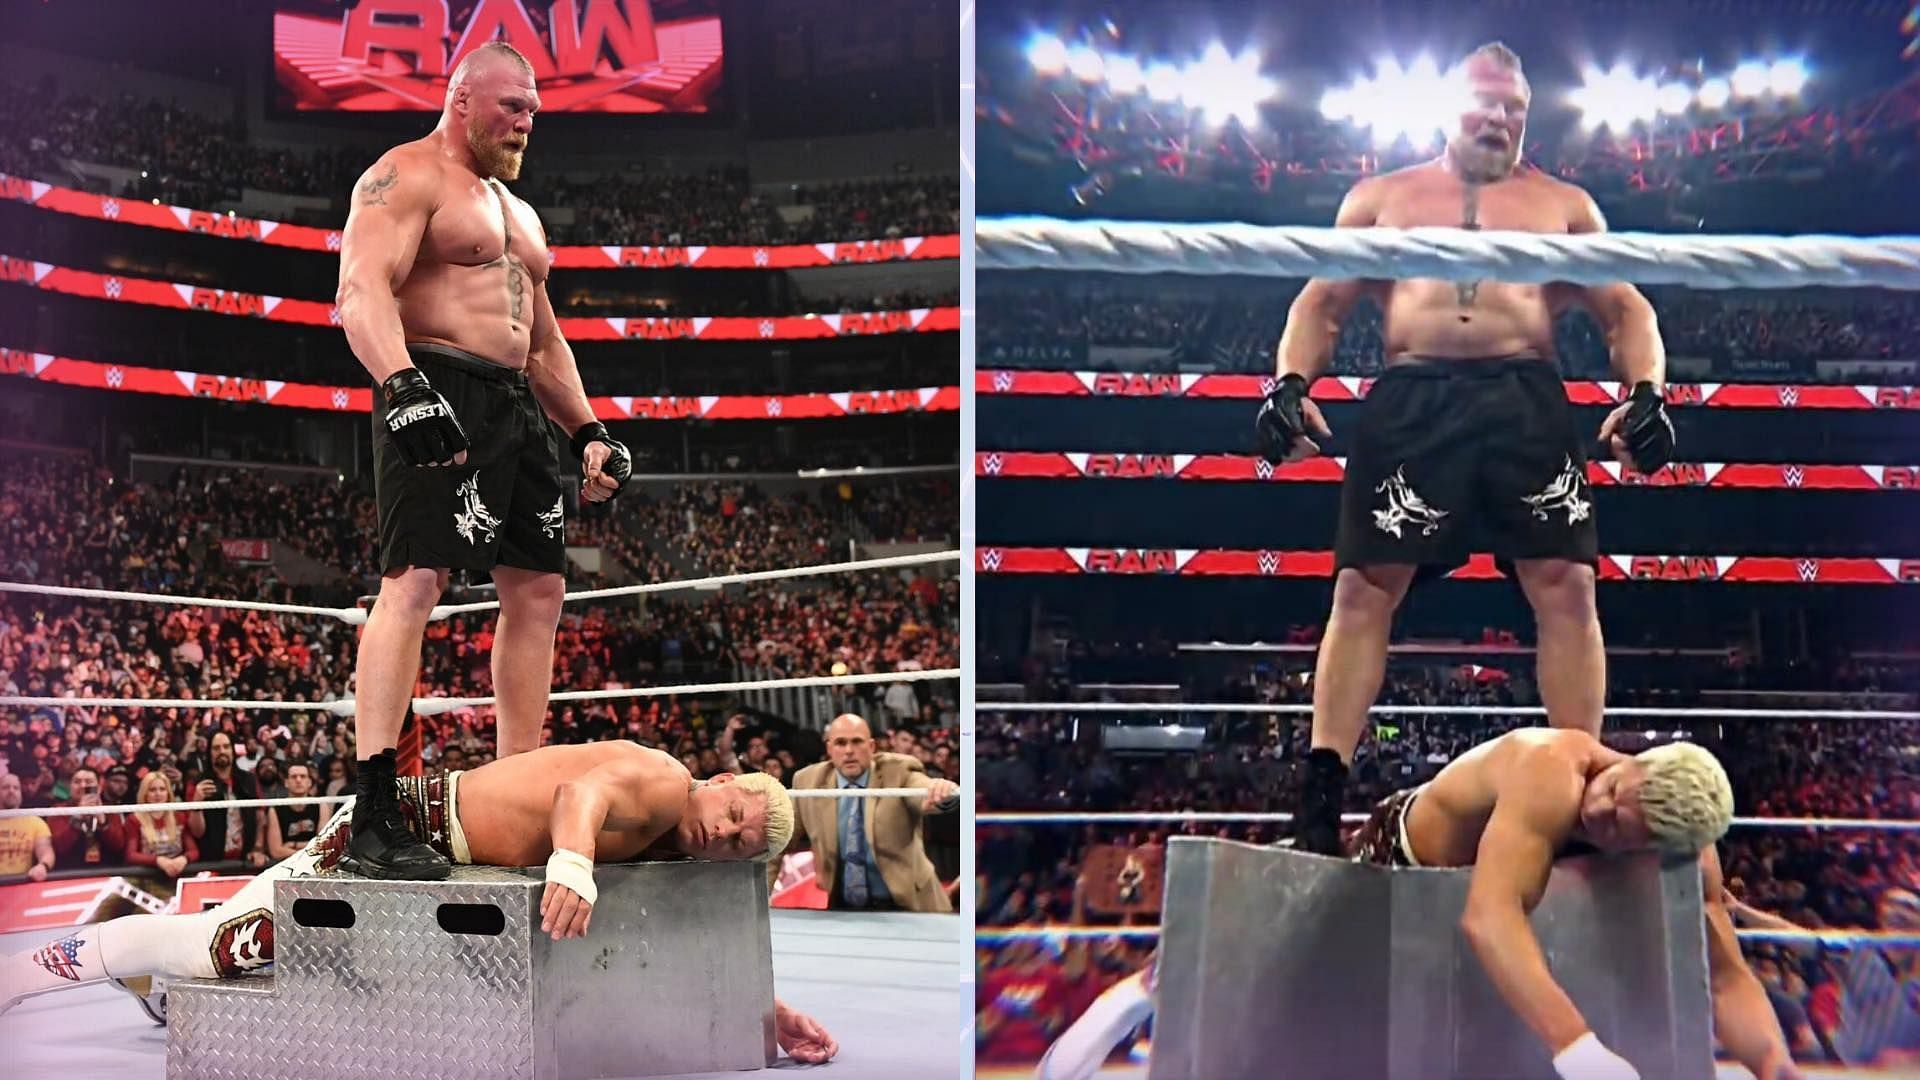 Brock Lesnar is set to appear on the upcoming episode of WWE RAW